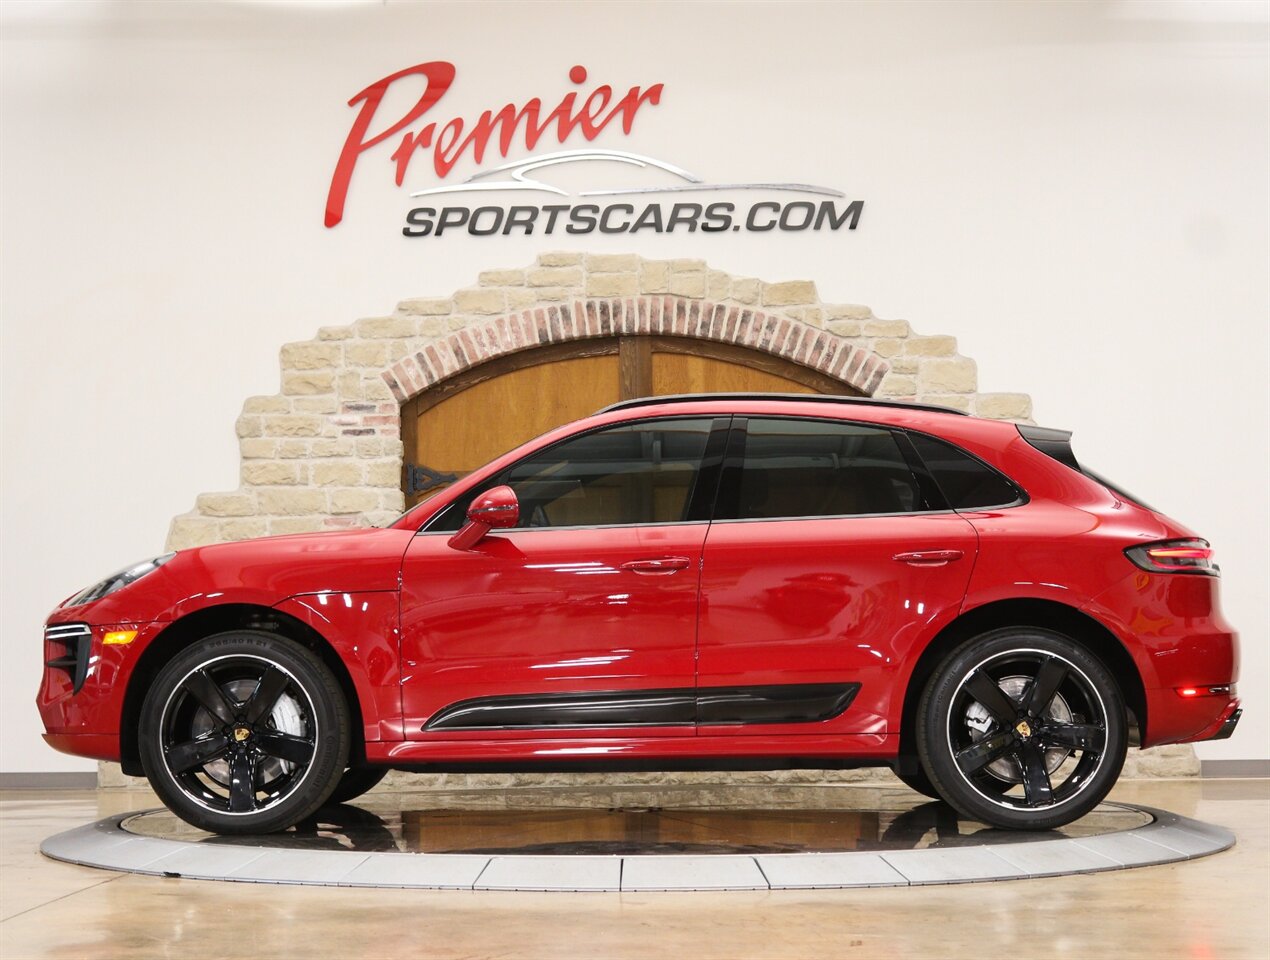 2020 Porsche Macan Turbo  (Lots of options MSRP $124,740) - Photo 8 - Springfield, MO 65802